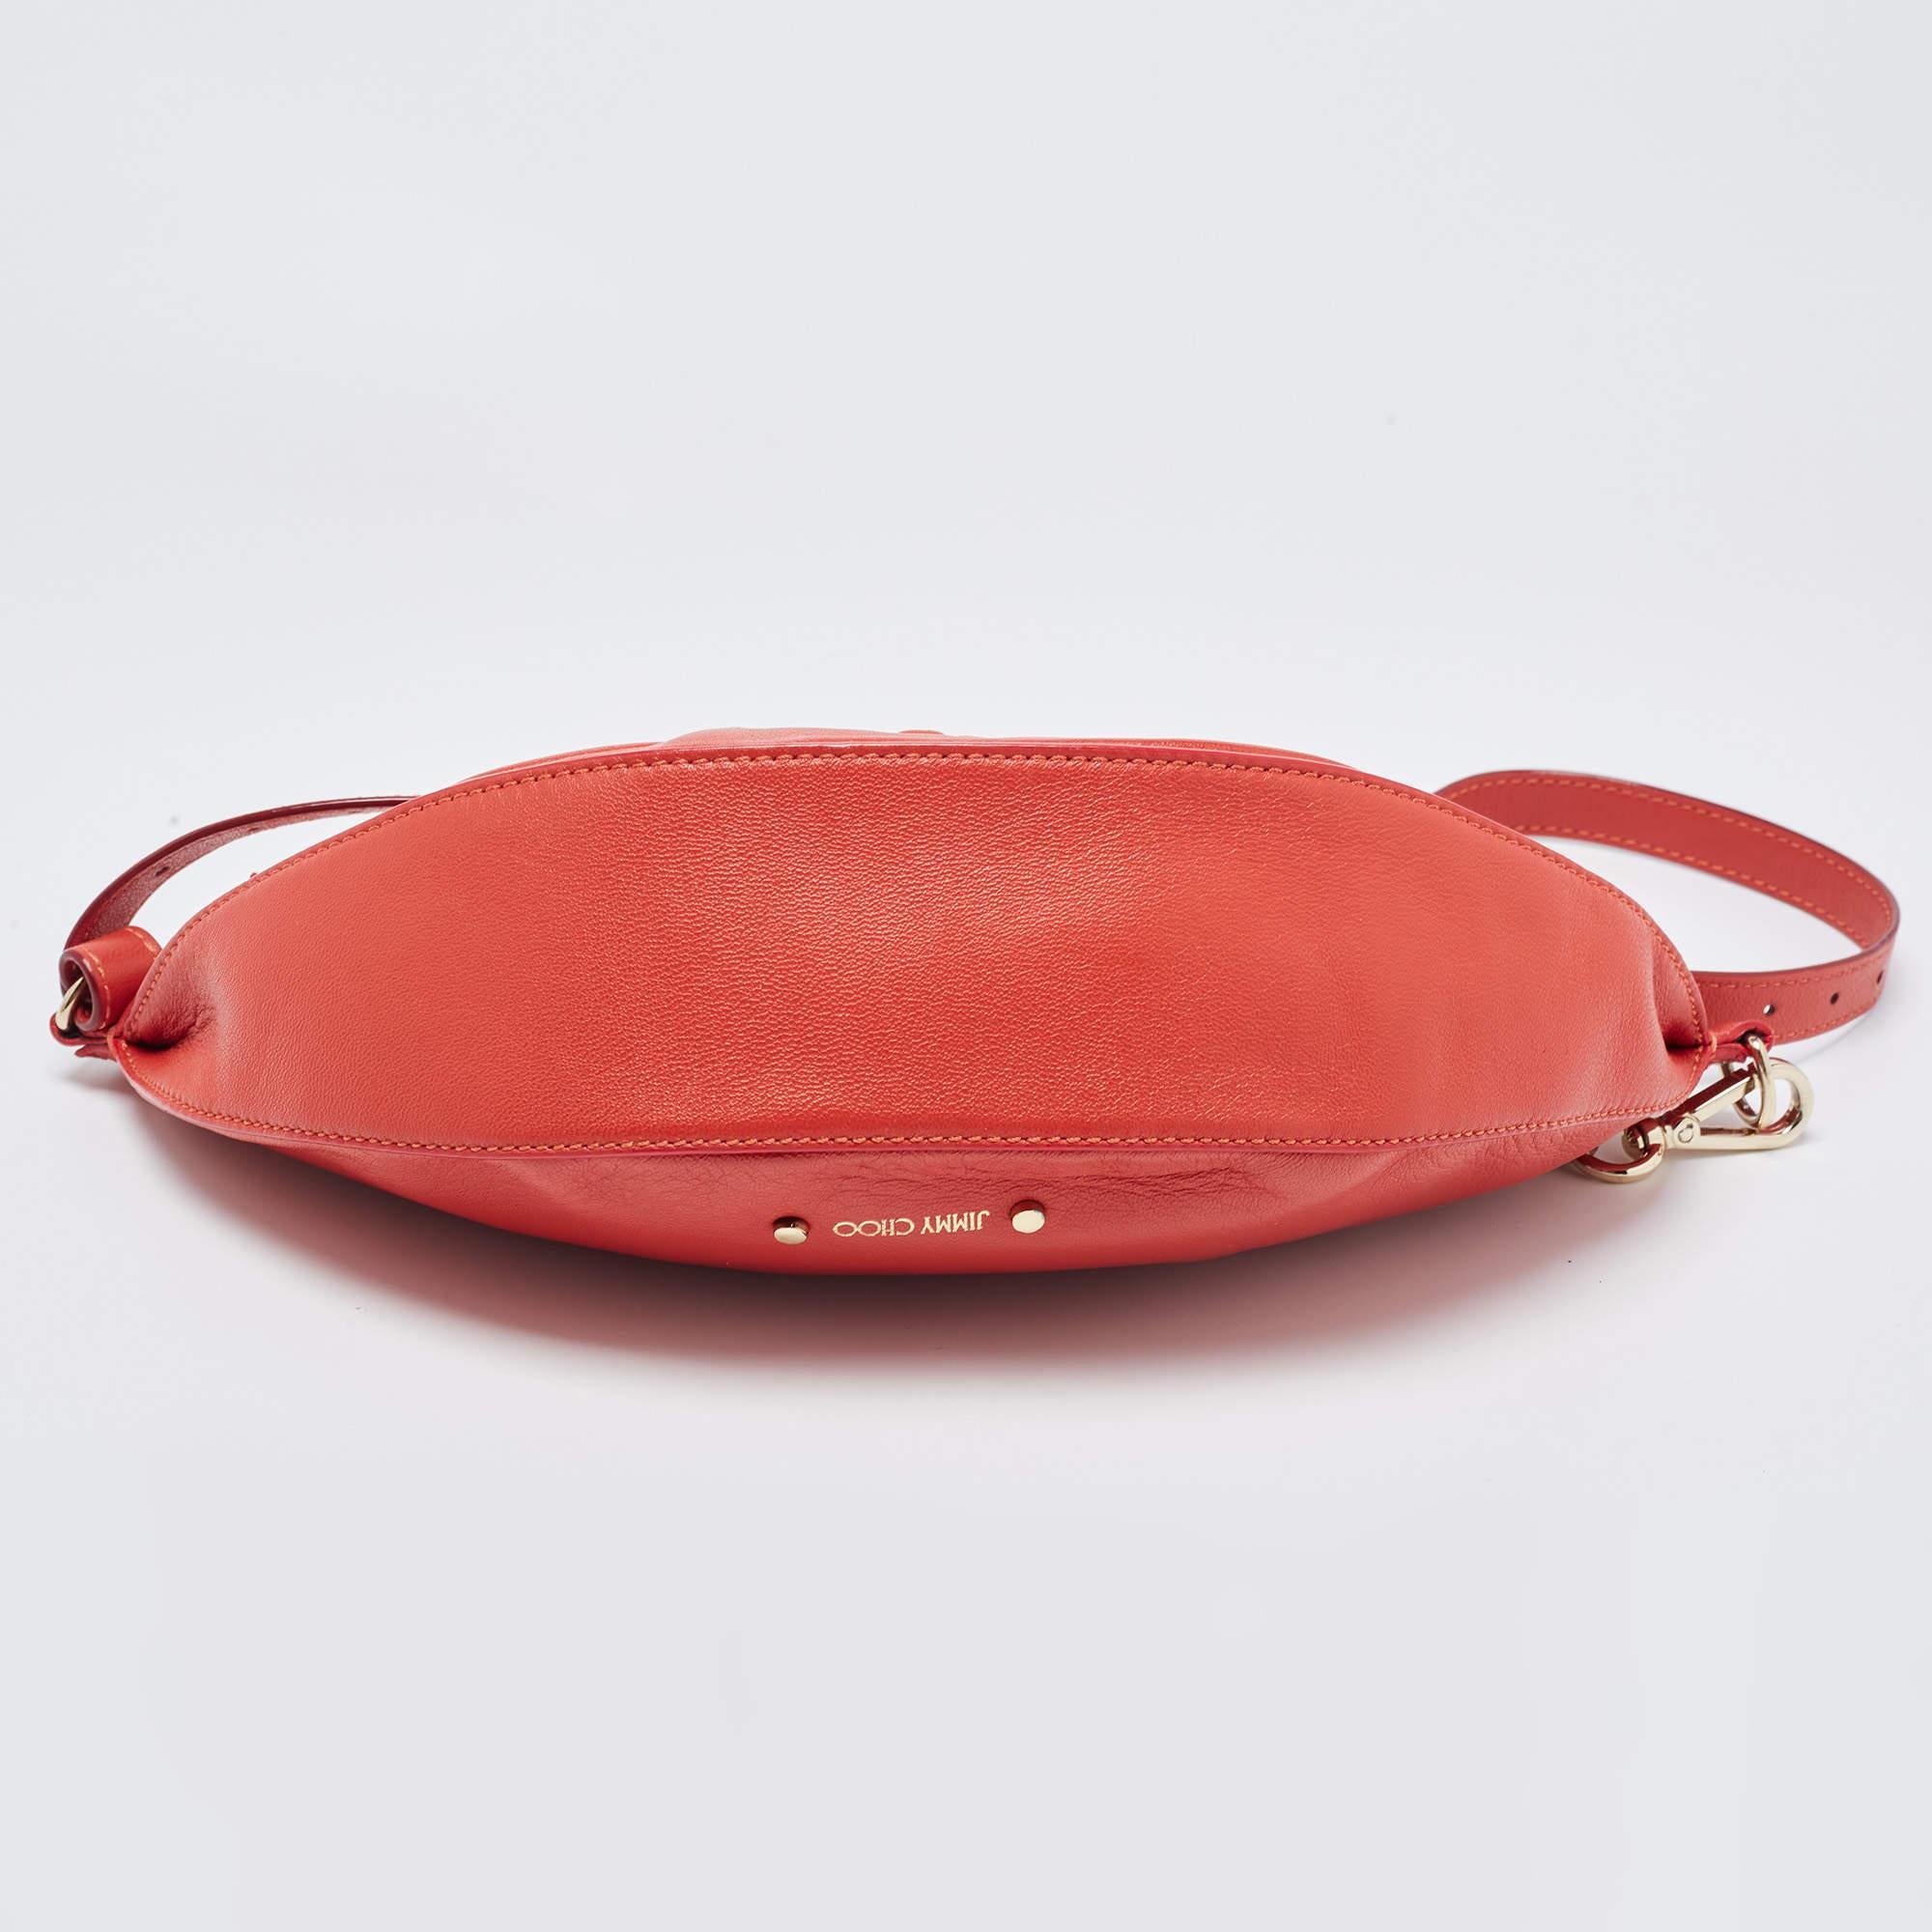 Jimmy Choo Red Leather Half Moon Zip Bag For Sale 2